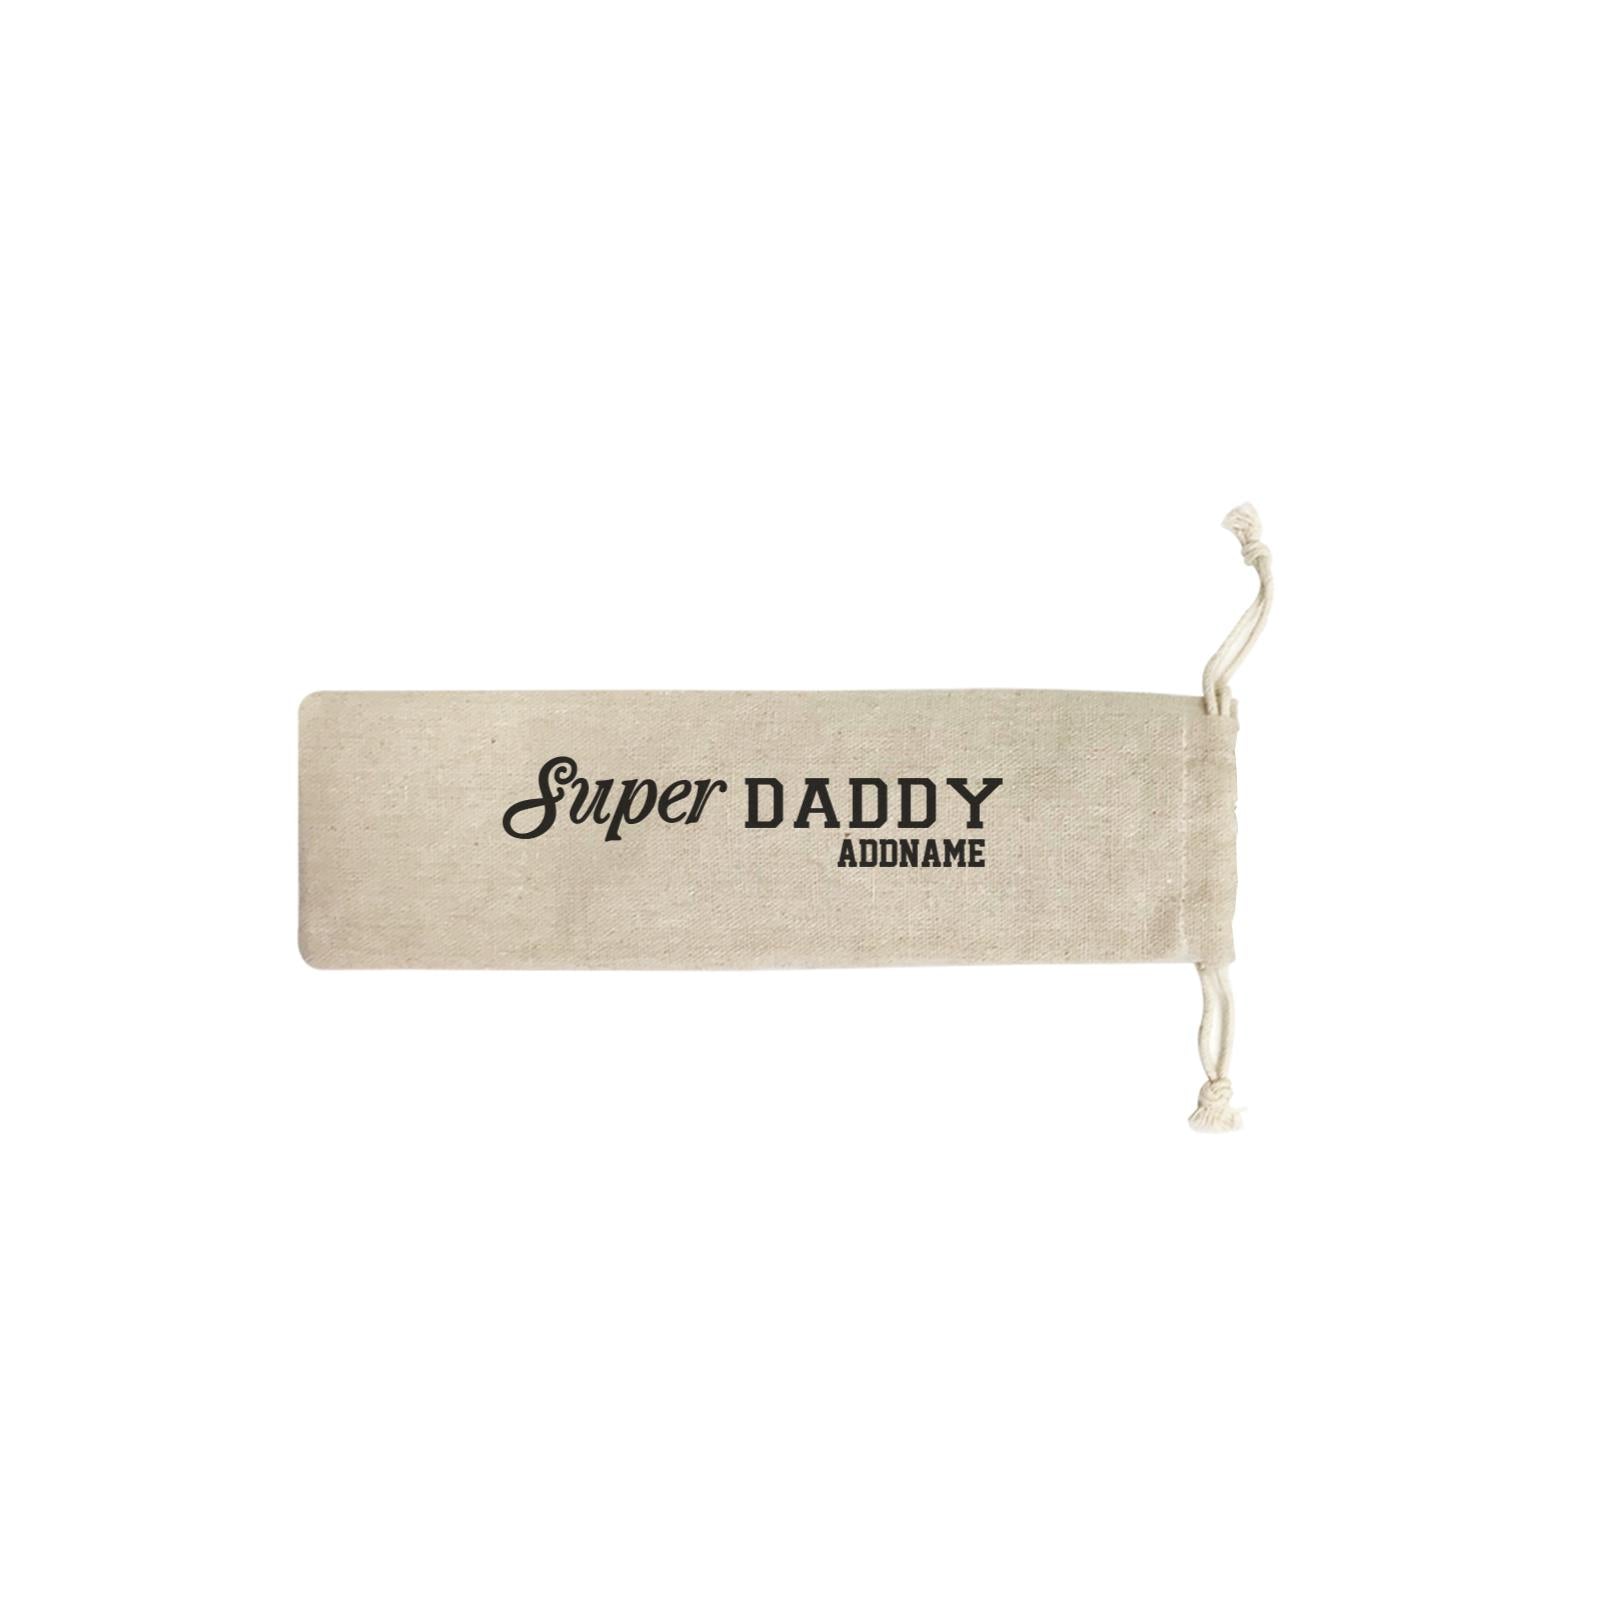 Super Definition Family Super Daddy Addname SB Straw Pouch (No Straws included)